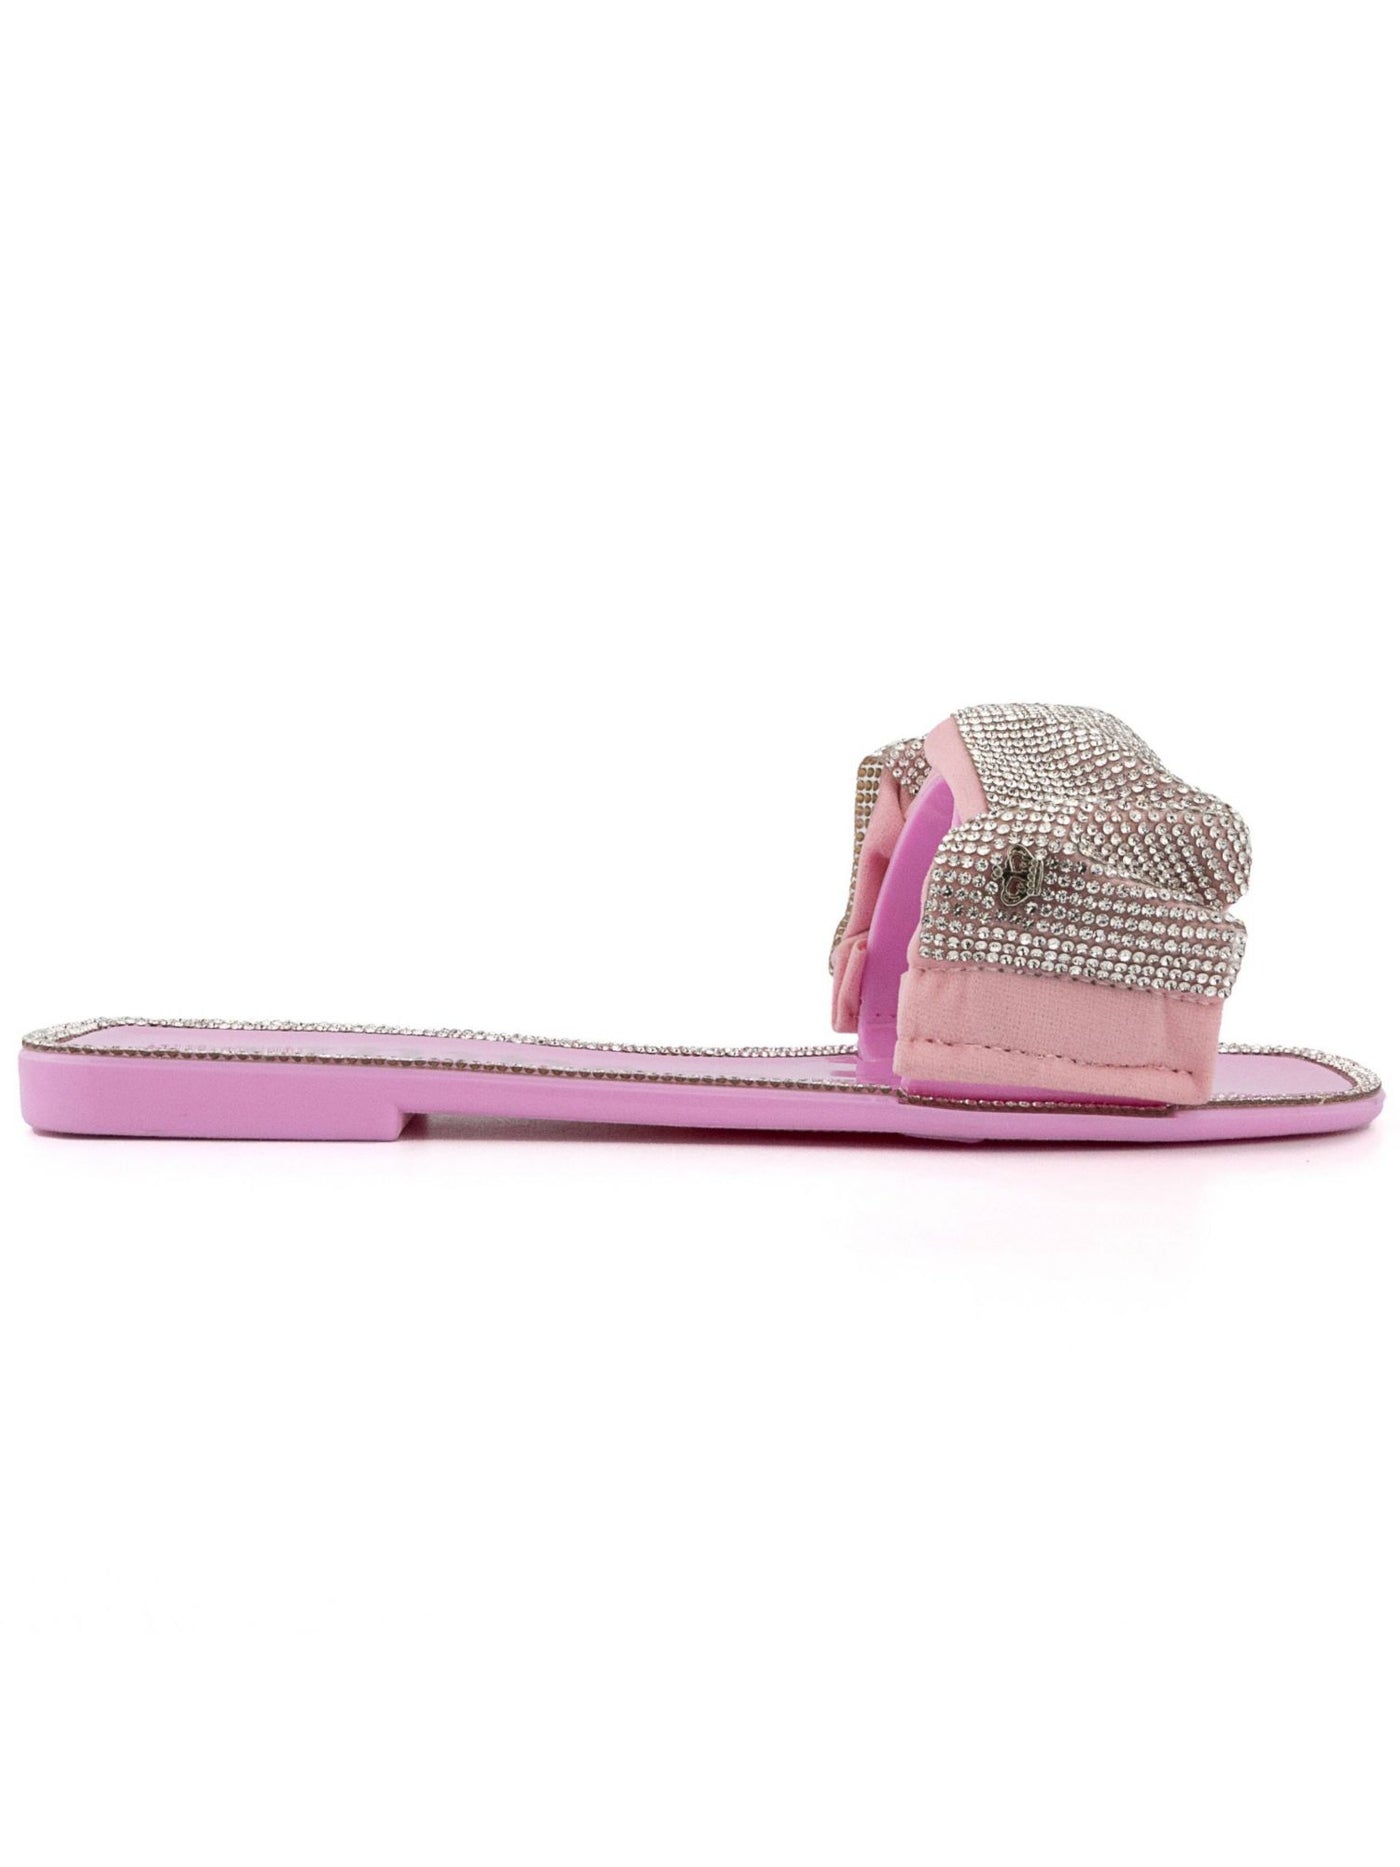 JUICY COUTURE Womens Pink Mixed Media Metallic Logo Embellished Hollyn Round Toe Slip On Slide Sandals Shoes 7 M